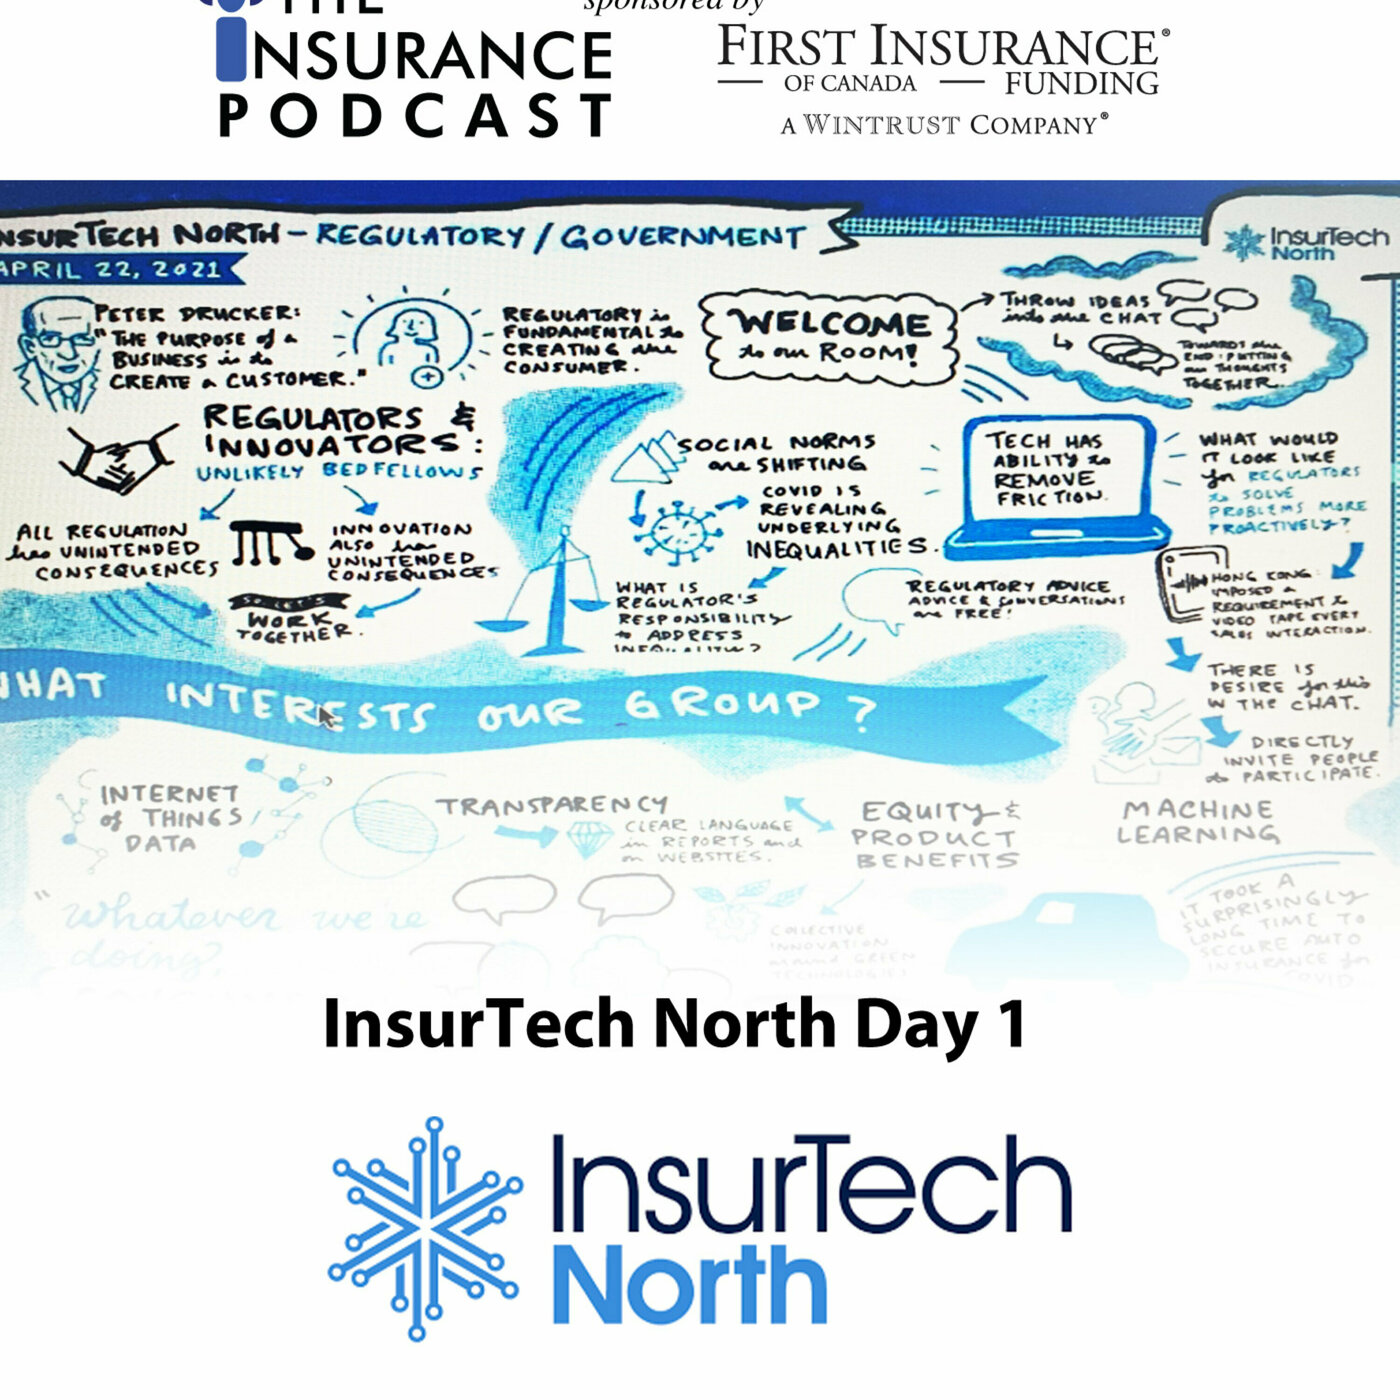 Insurtech North Day 1 Image